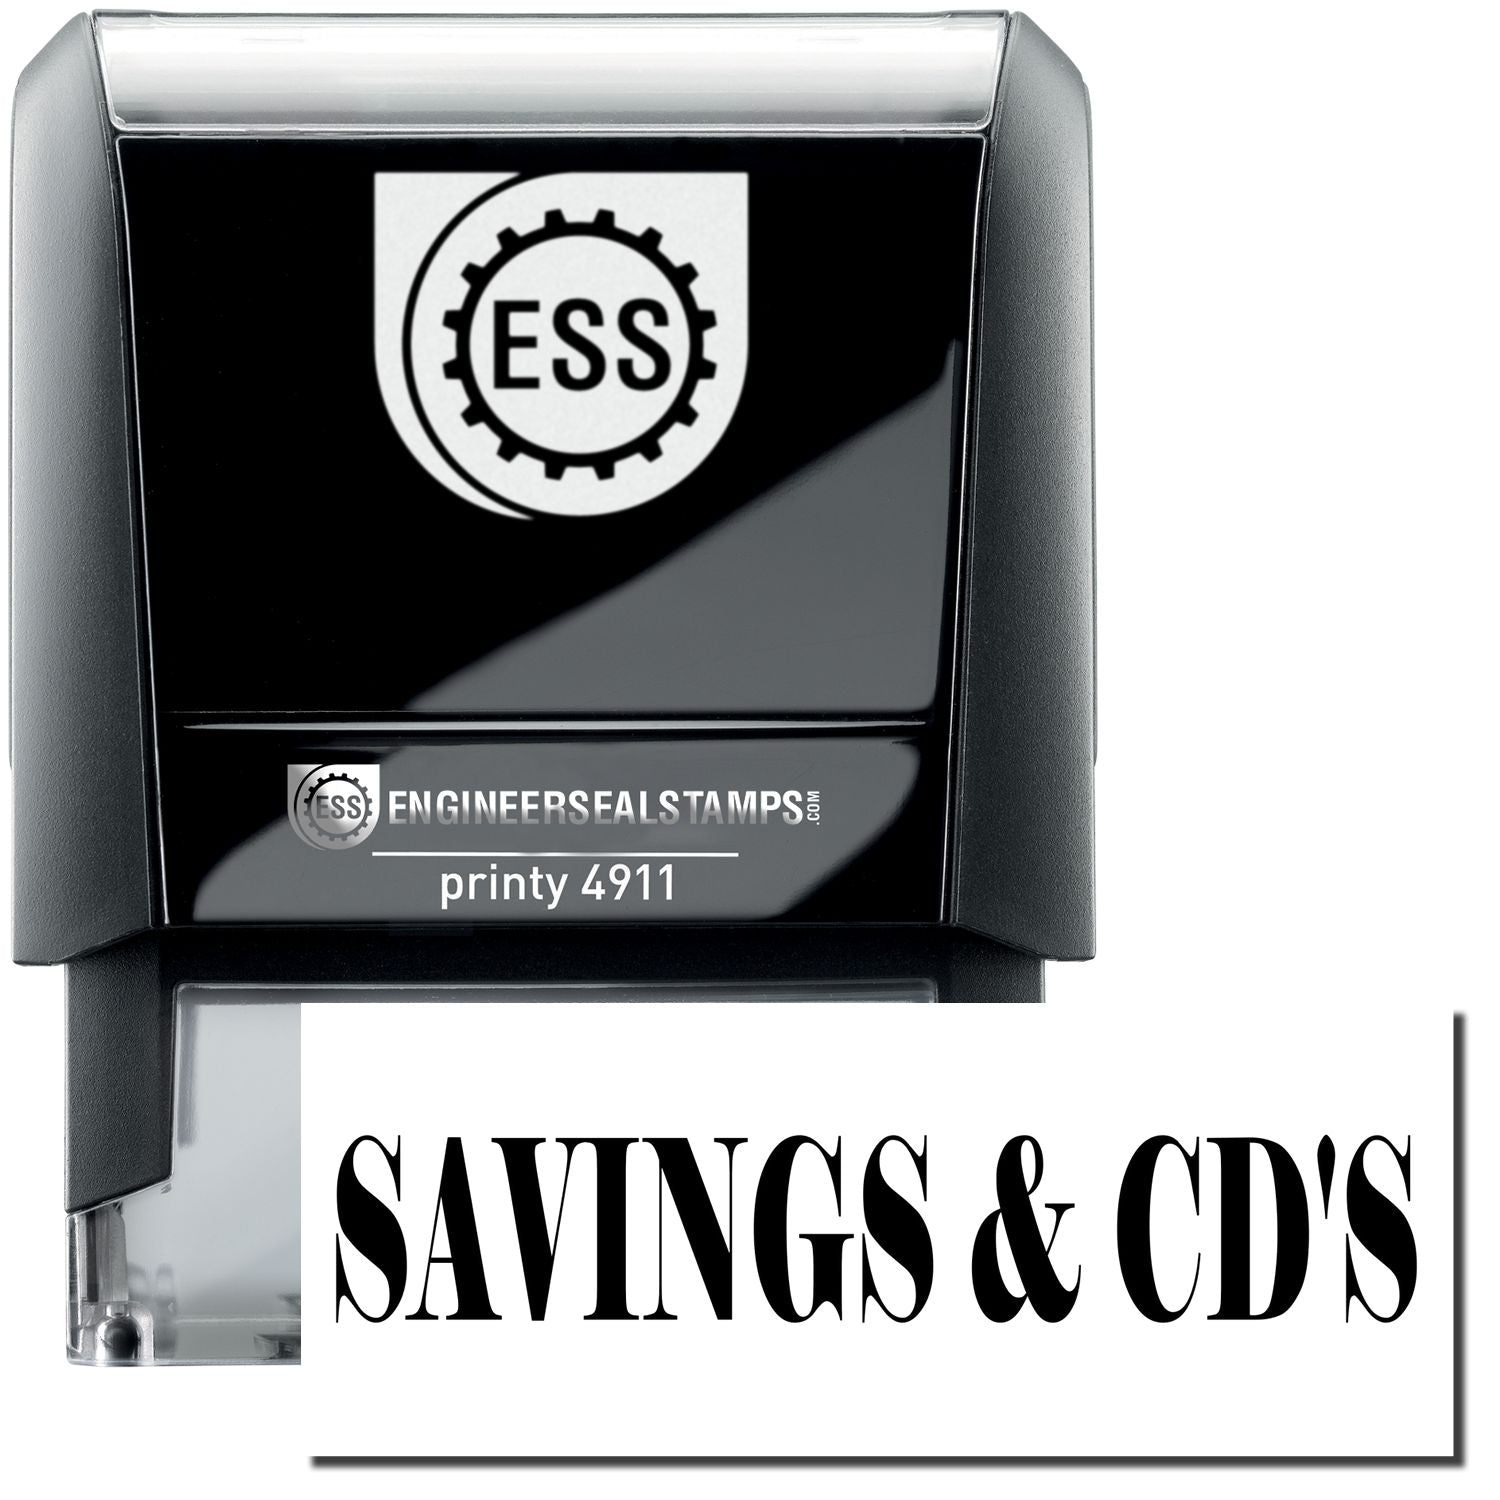 A self-inking stamp with a stamped image showing how the text "SAVINGS & CD'S" is displayed after stamping.